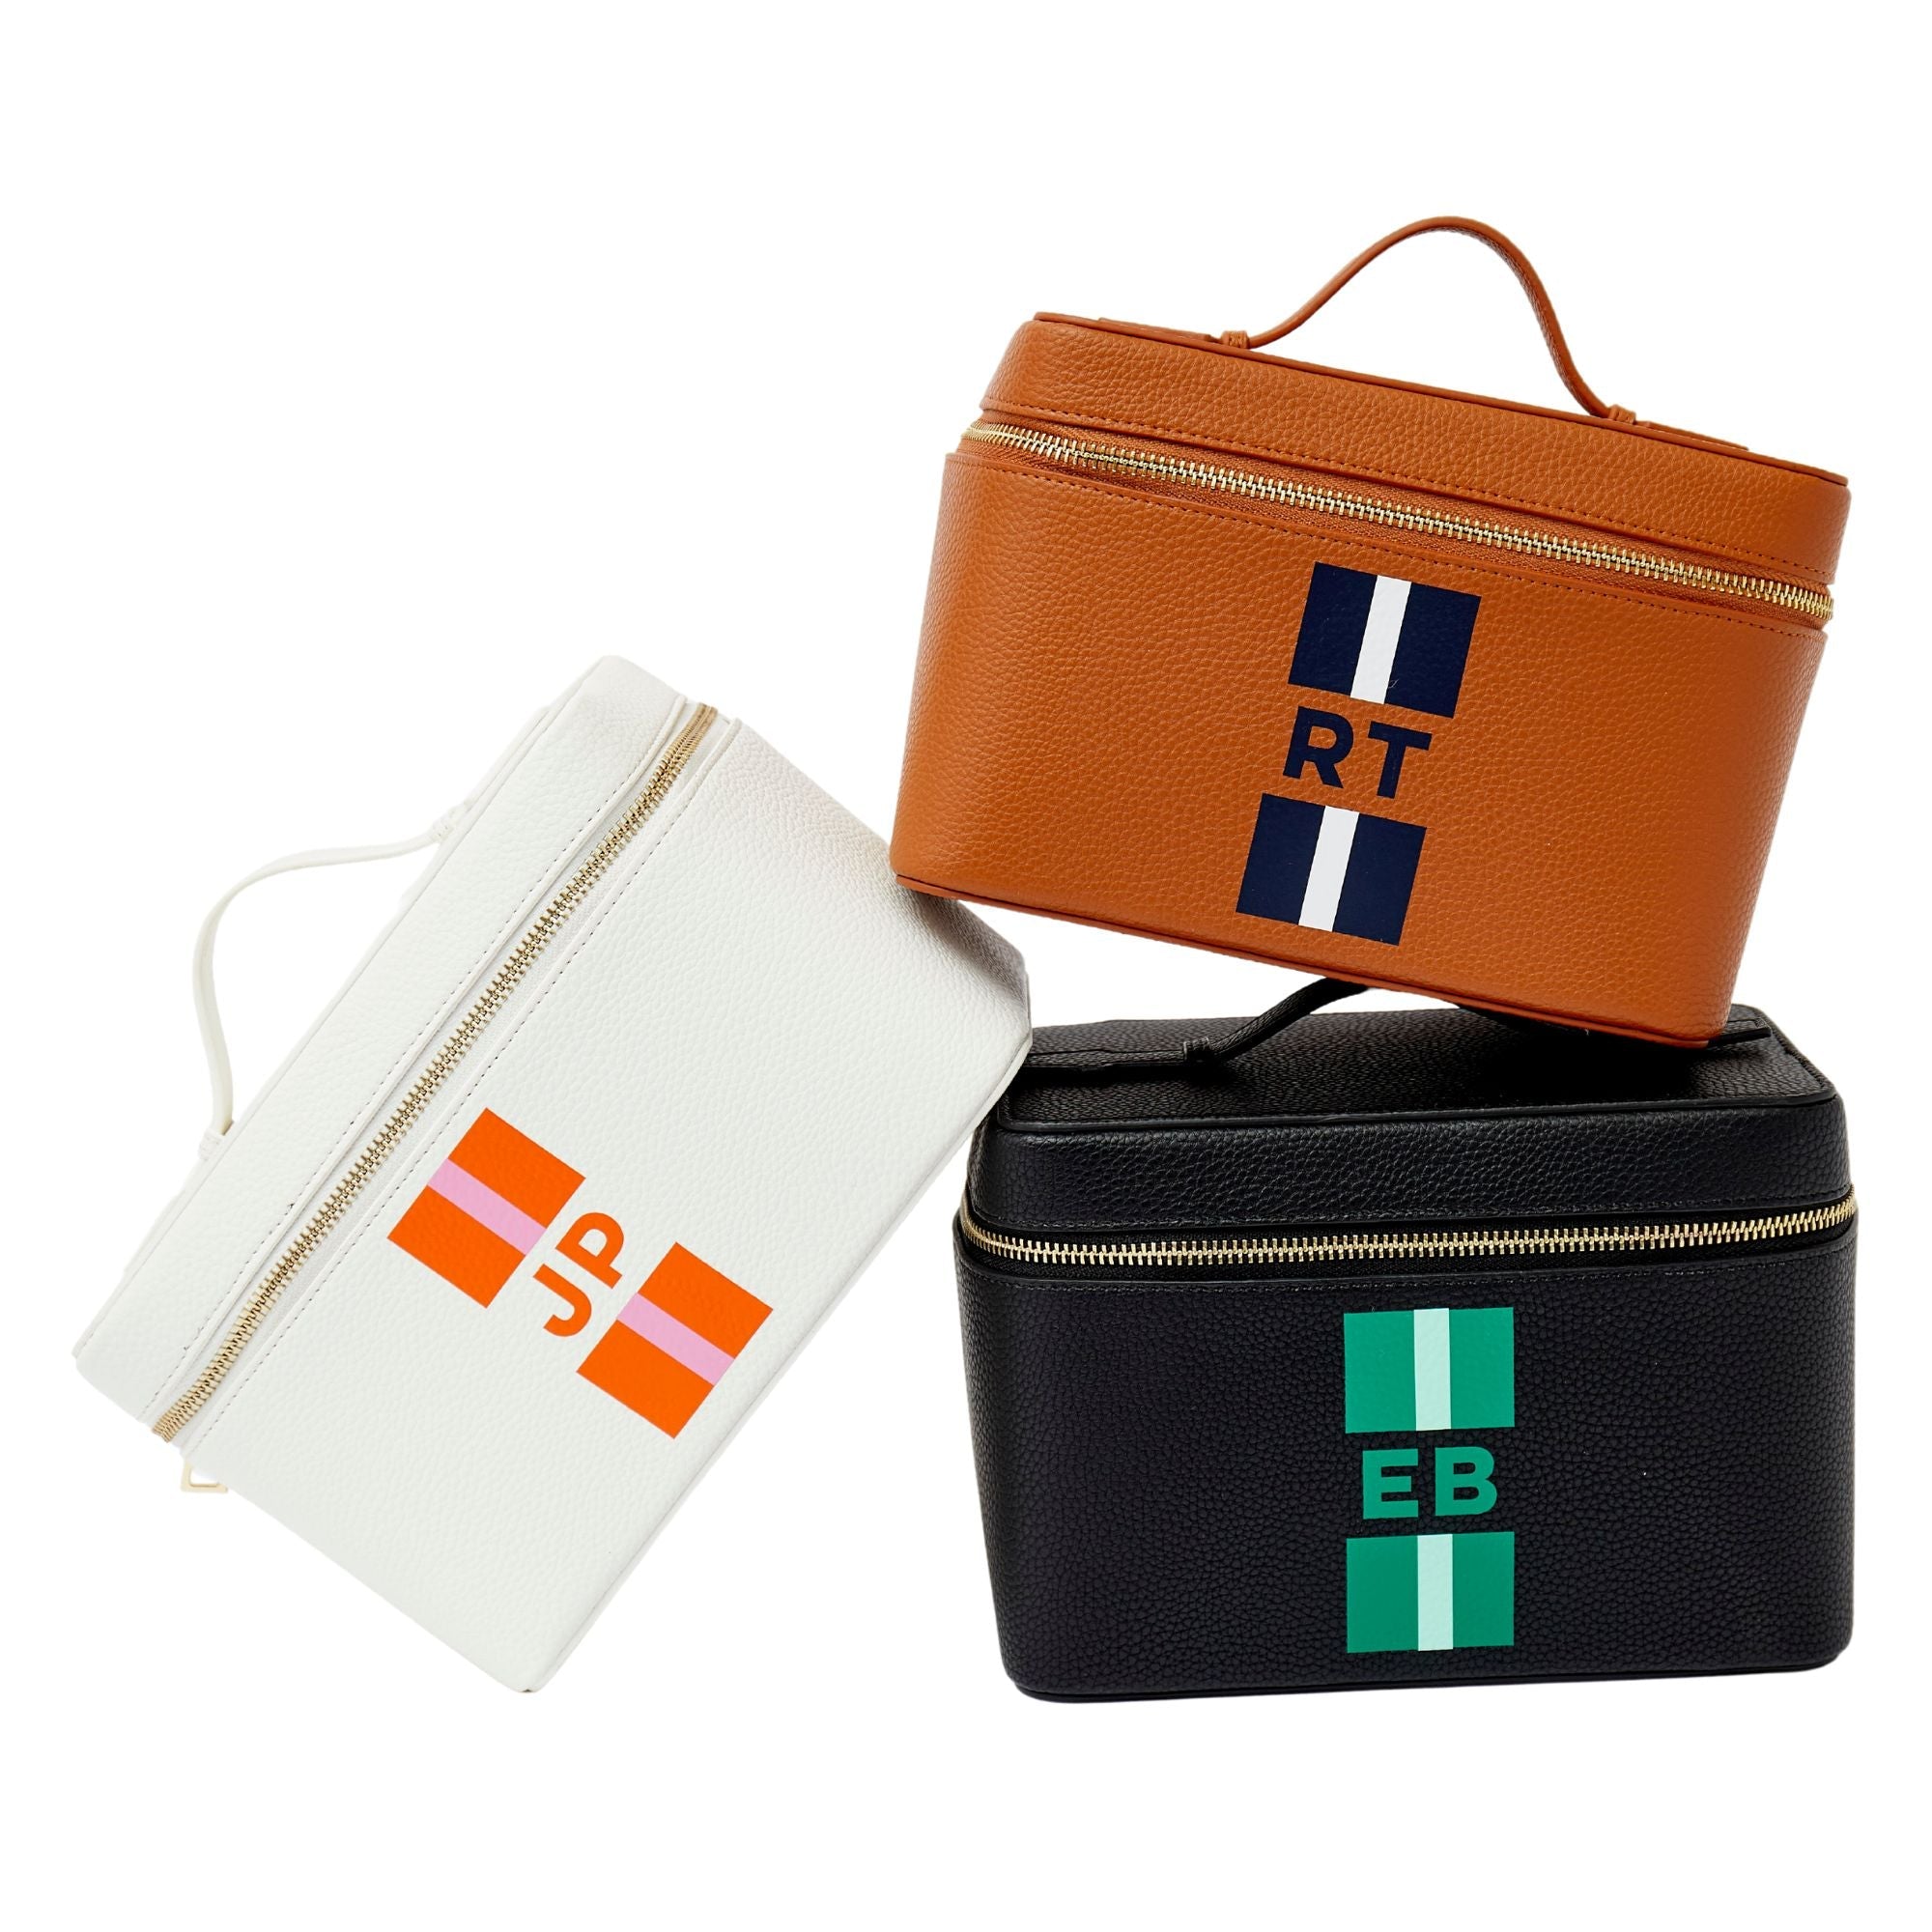 A group of white, tan, and black train cases are personalized with colorful stripe monograms.